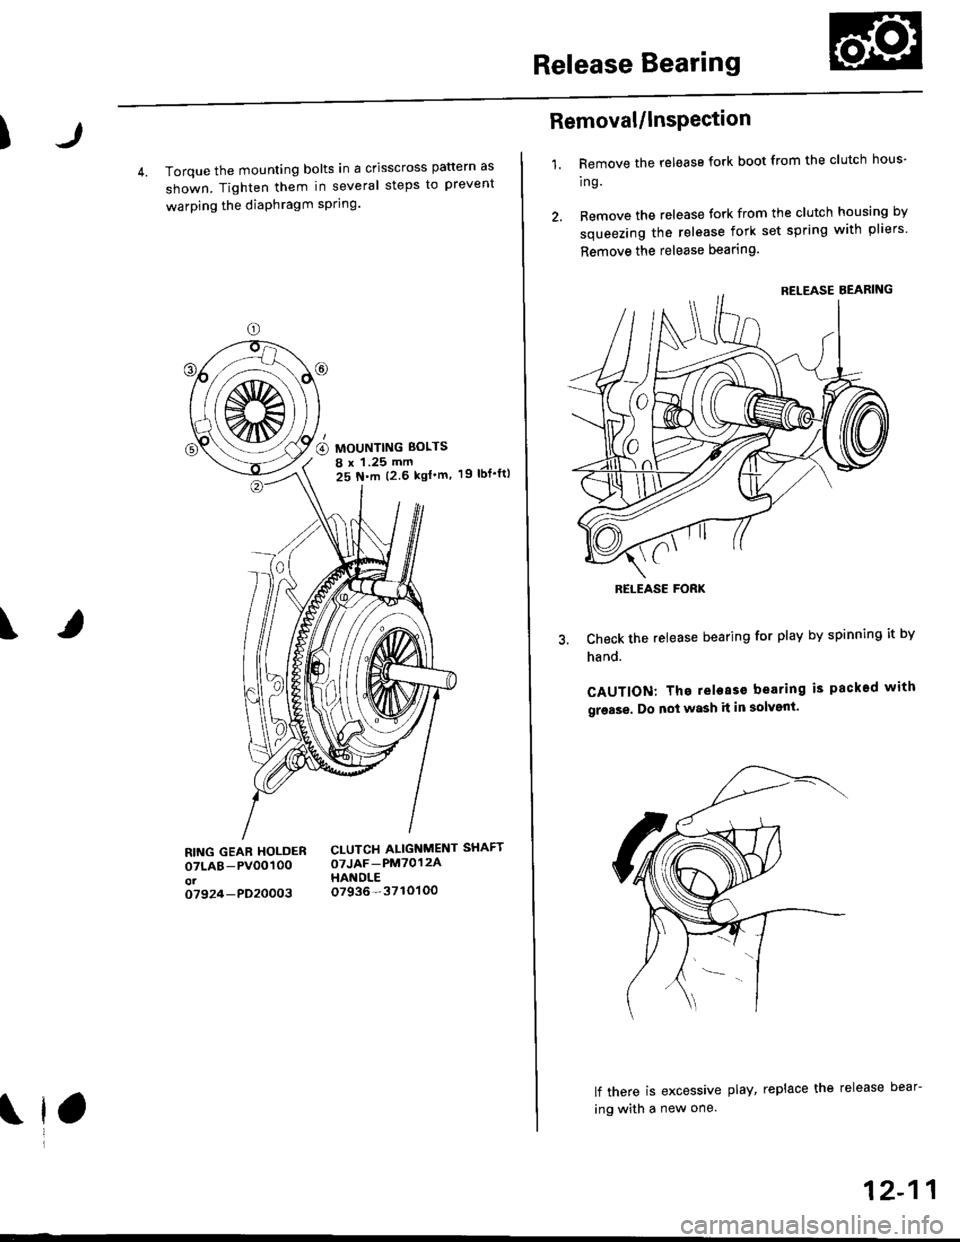 HONDA CIVIC 1996 6.G Workshop Manual Release Bearing
)
4. Torque the mounting bolts in a crisscross pattern as
shown. Tighten them in several steps to prevent
warping the diaPhragm sPring.
19 rbf.ft)
\
RING GEAR HOLDERoTLAB-PV00100ot0792